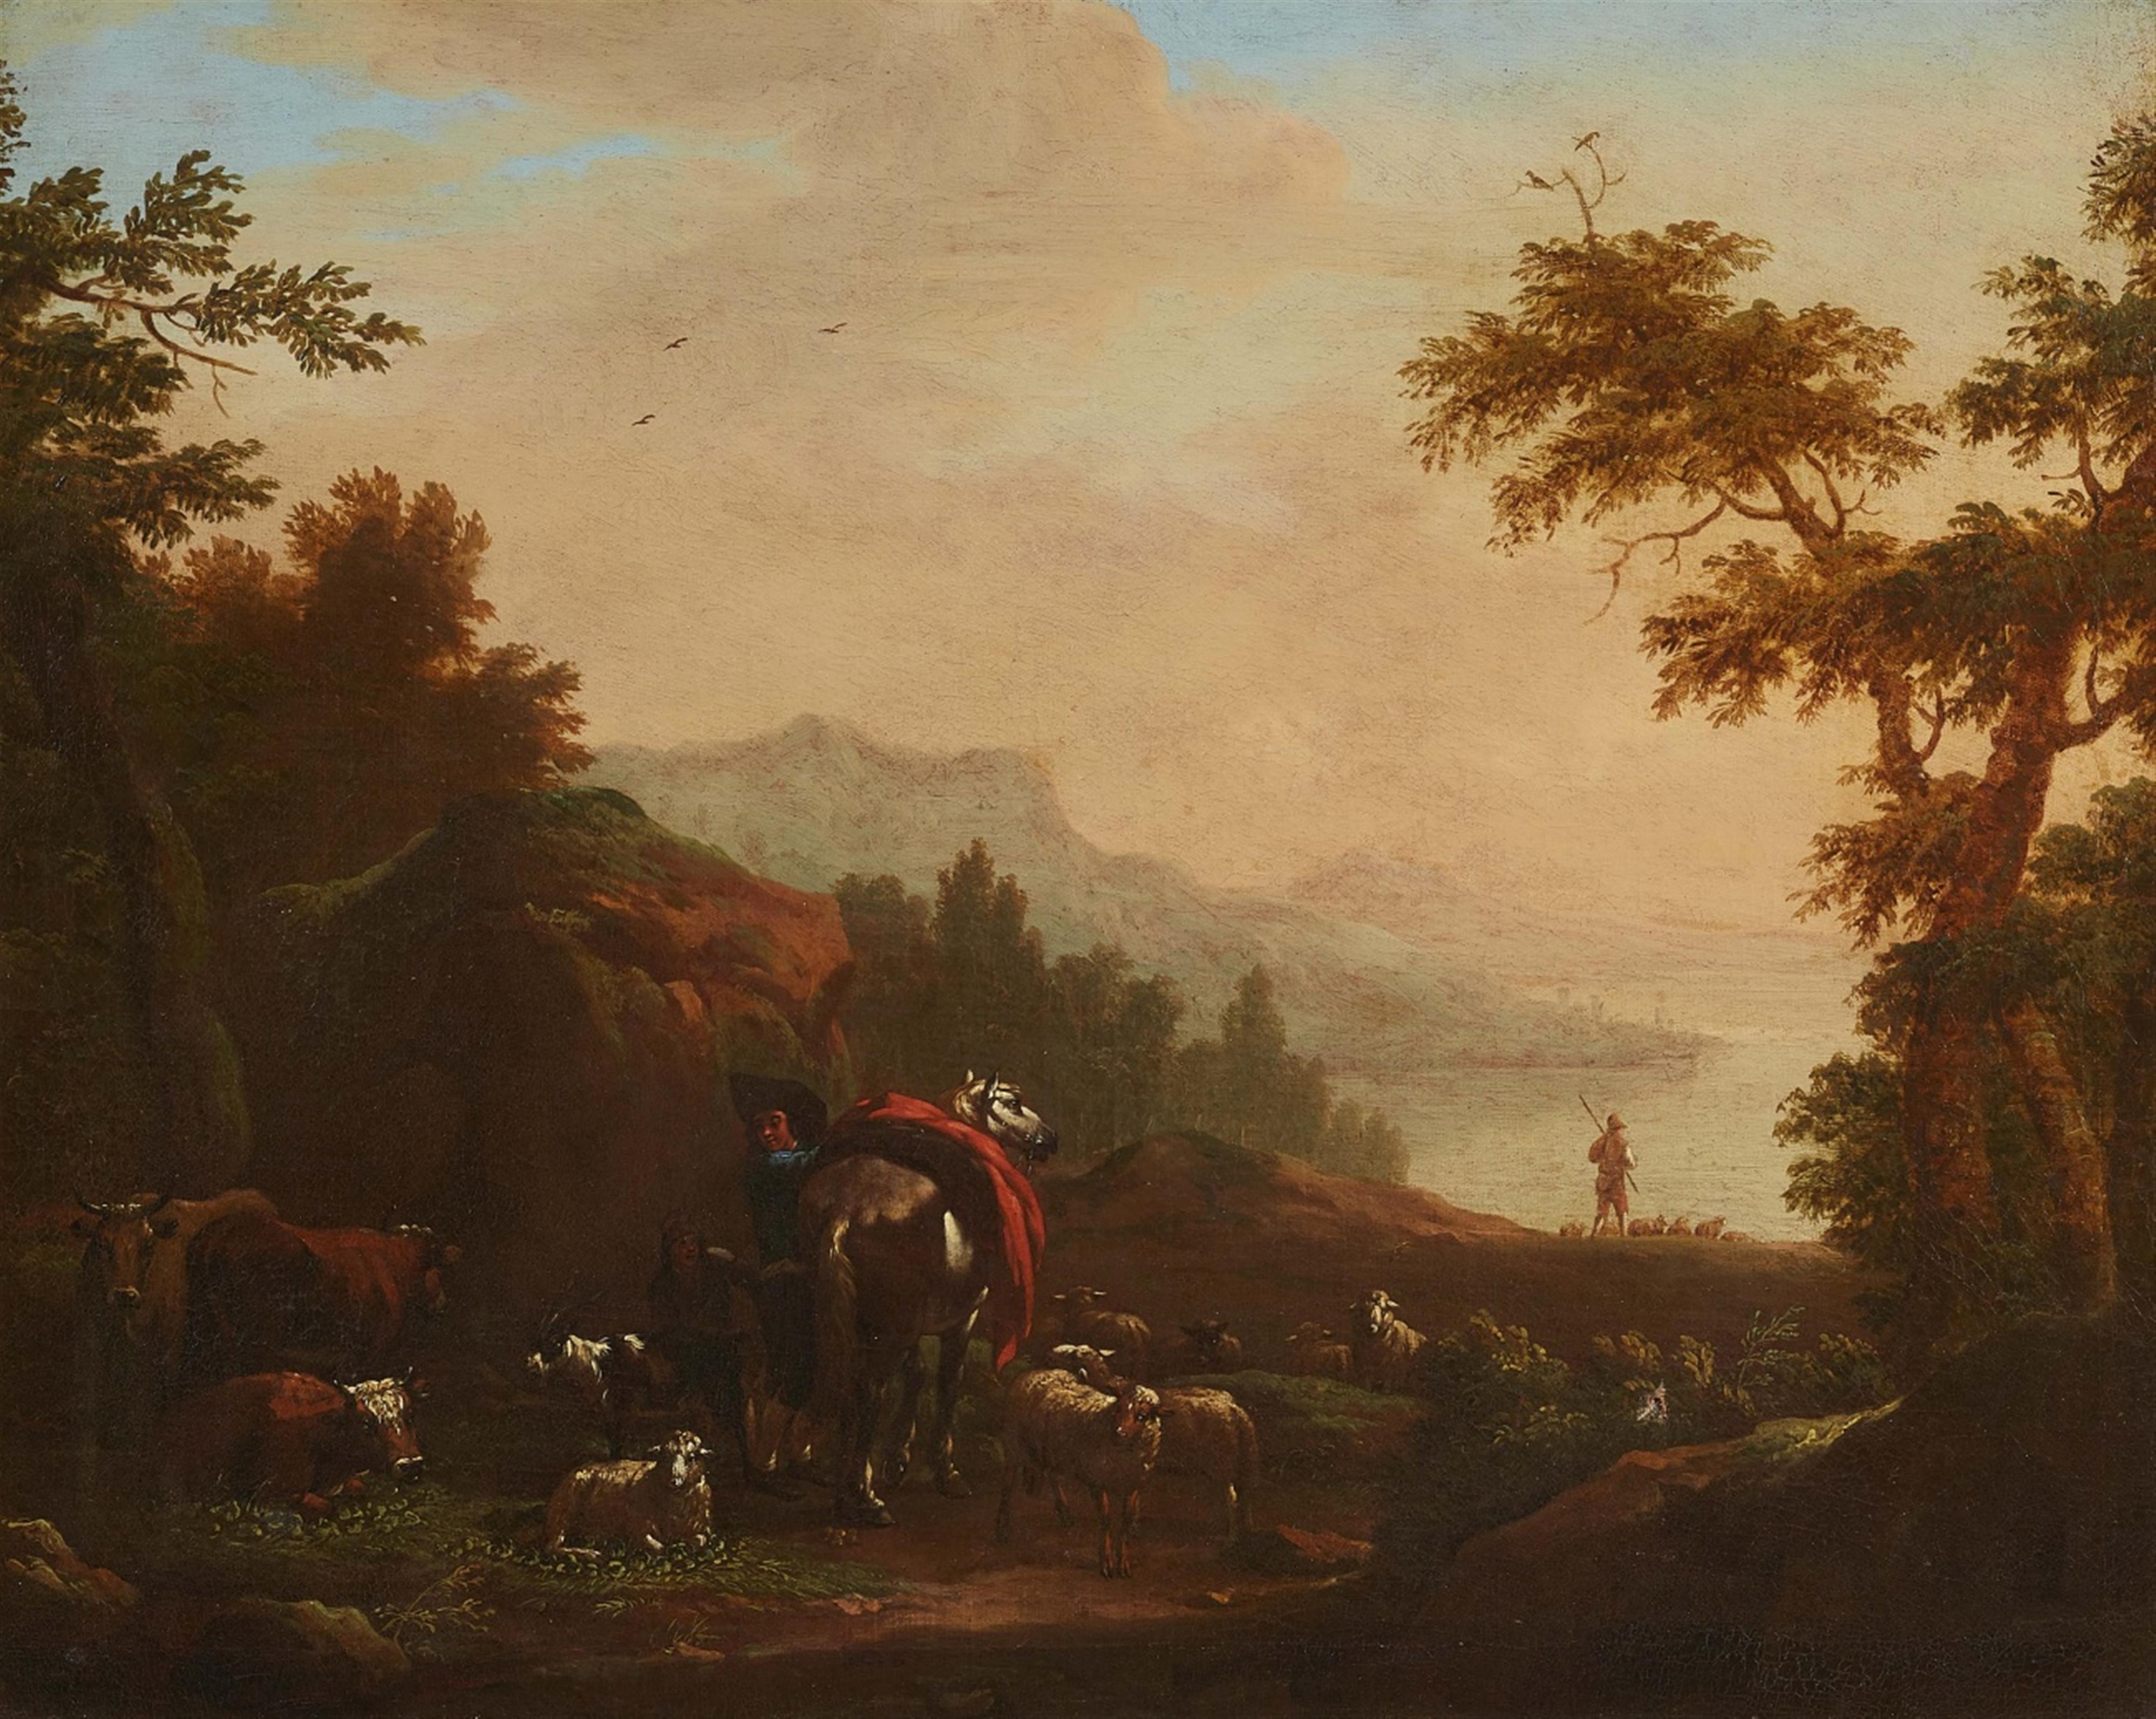 Jan Both - Landscape with a Herd of Cows and a Rider - image-1